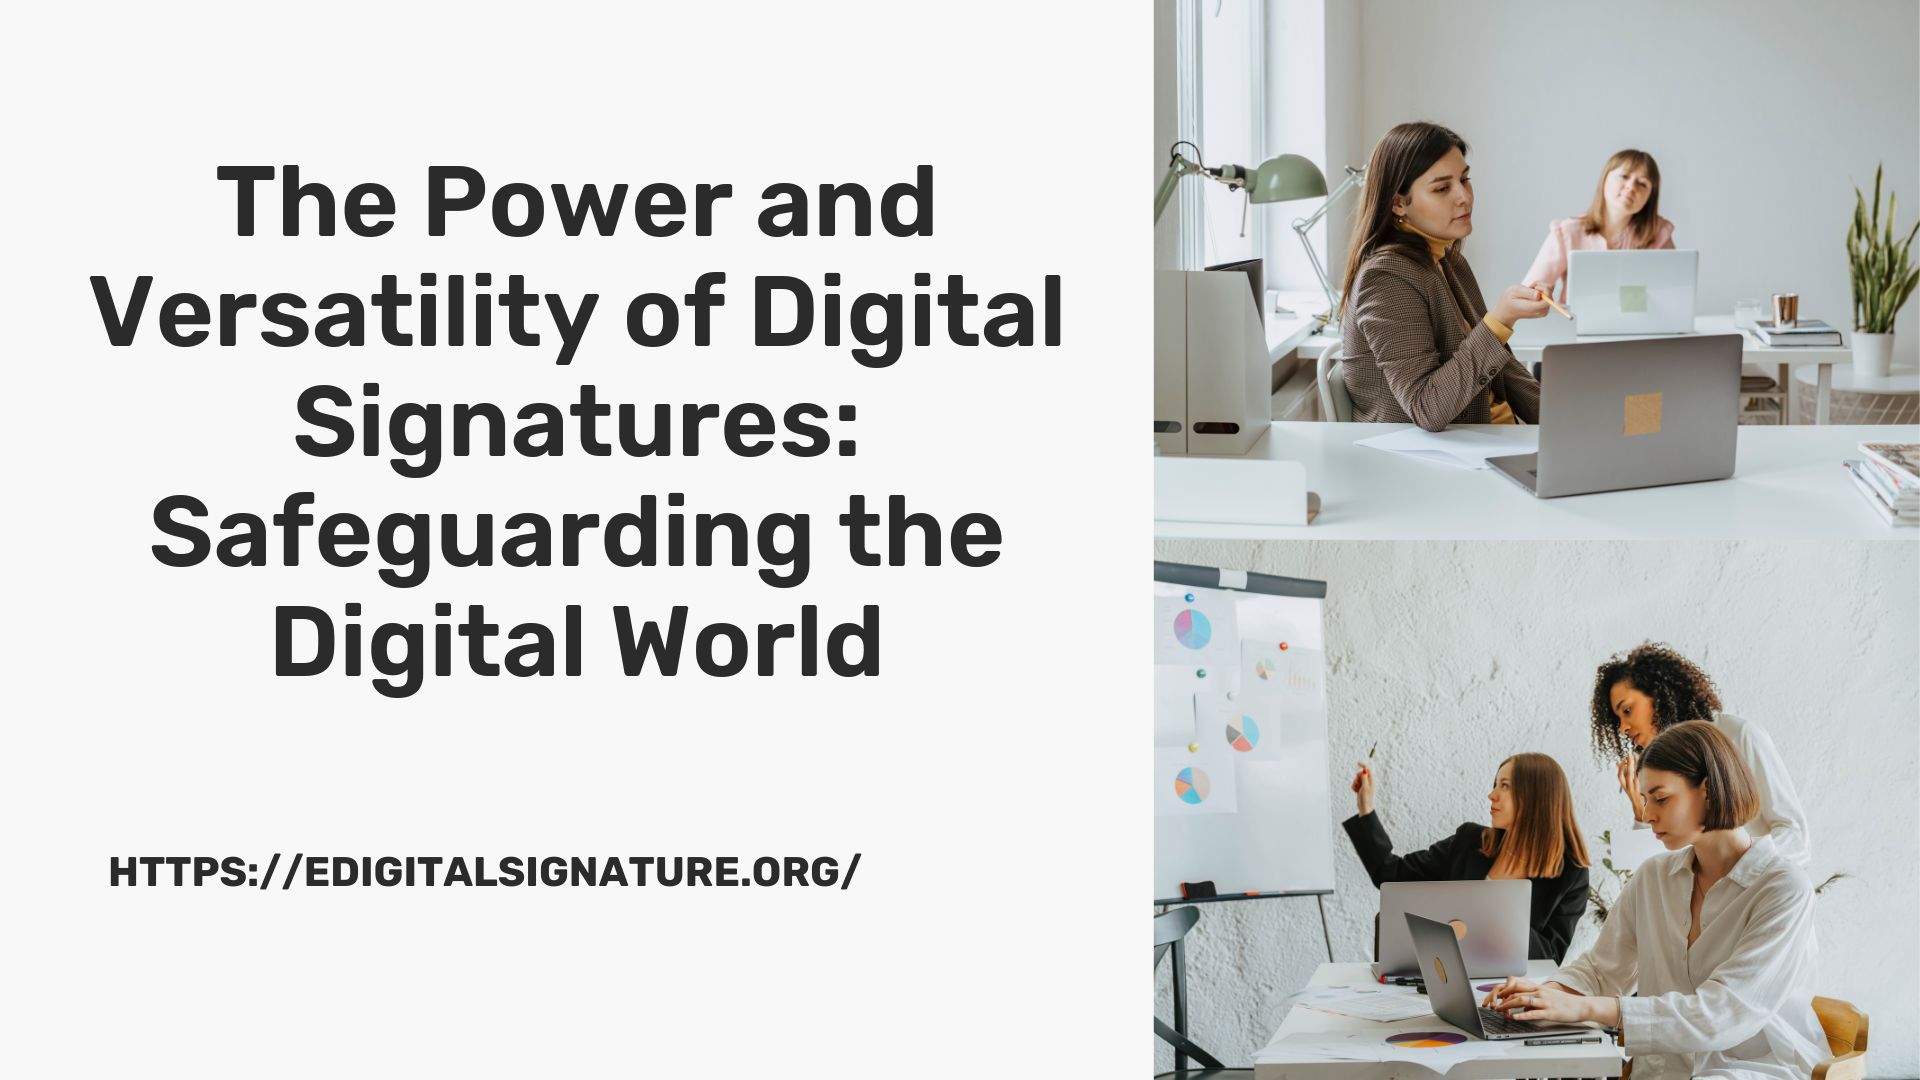 The Power and Versatility of Digital Signatures: Safeguarding the Digital World